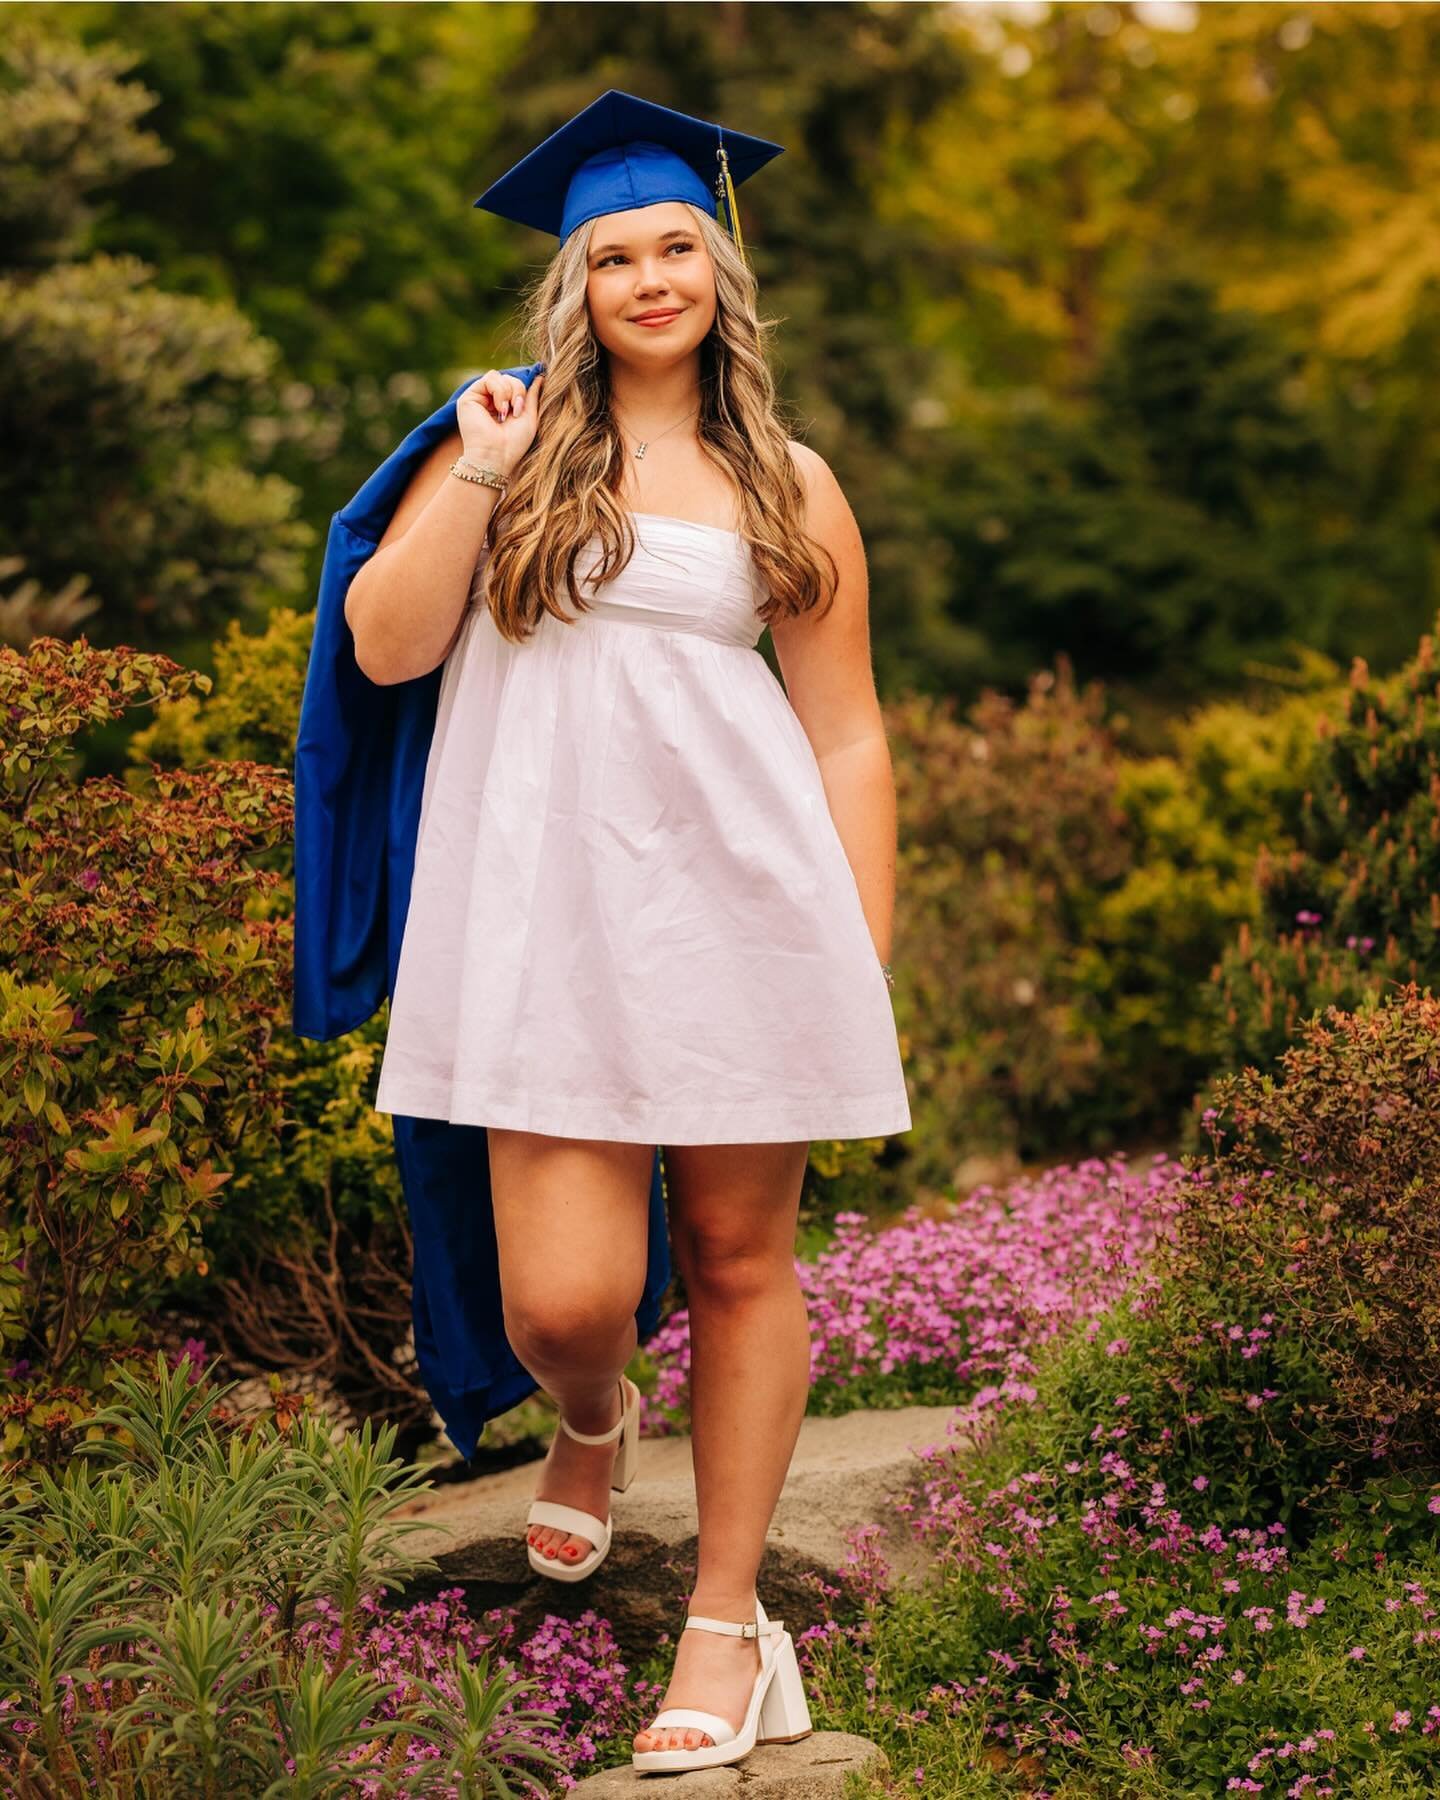 Senioritis be the virus-
Who&rsquo;s got it? 

Tic tok on the clock- it should be remedied soon! 
Same for junior, sophomore, and freshmanitis too! 
.
.
#senioritis 
#erinkelliseniors 
#capandgownpictures #capandgownsession 
#classof2024 #gradsession